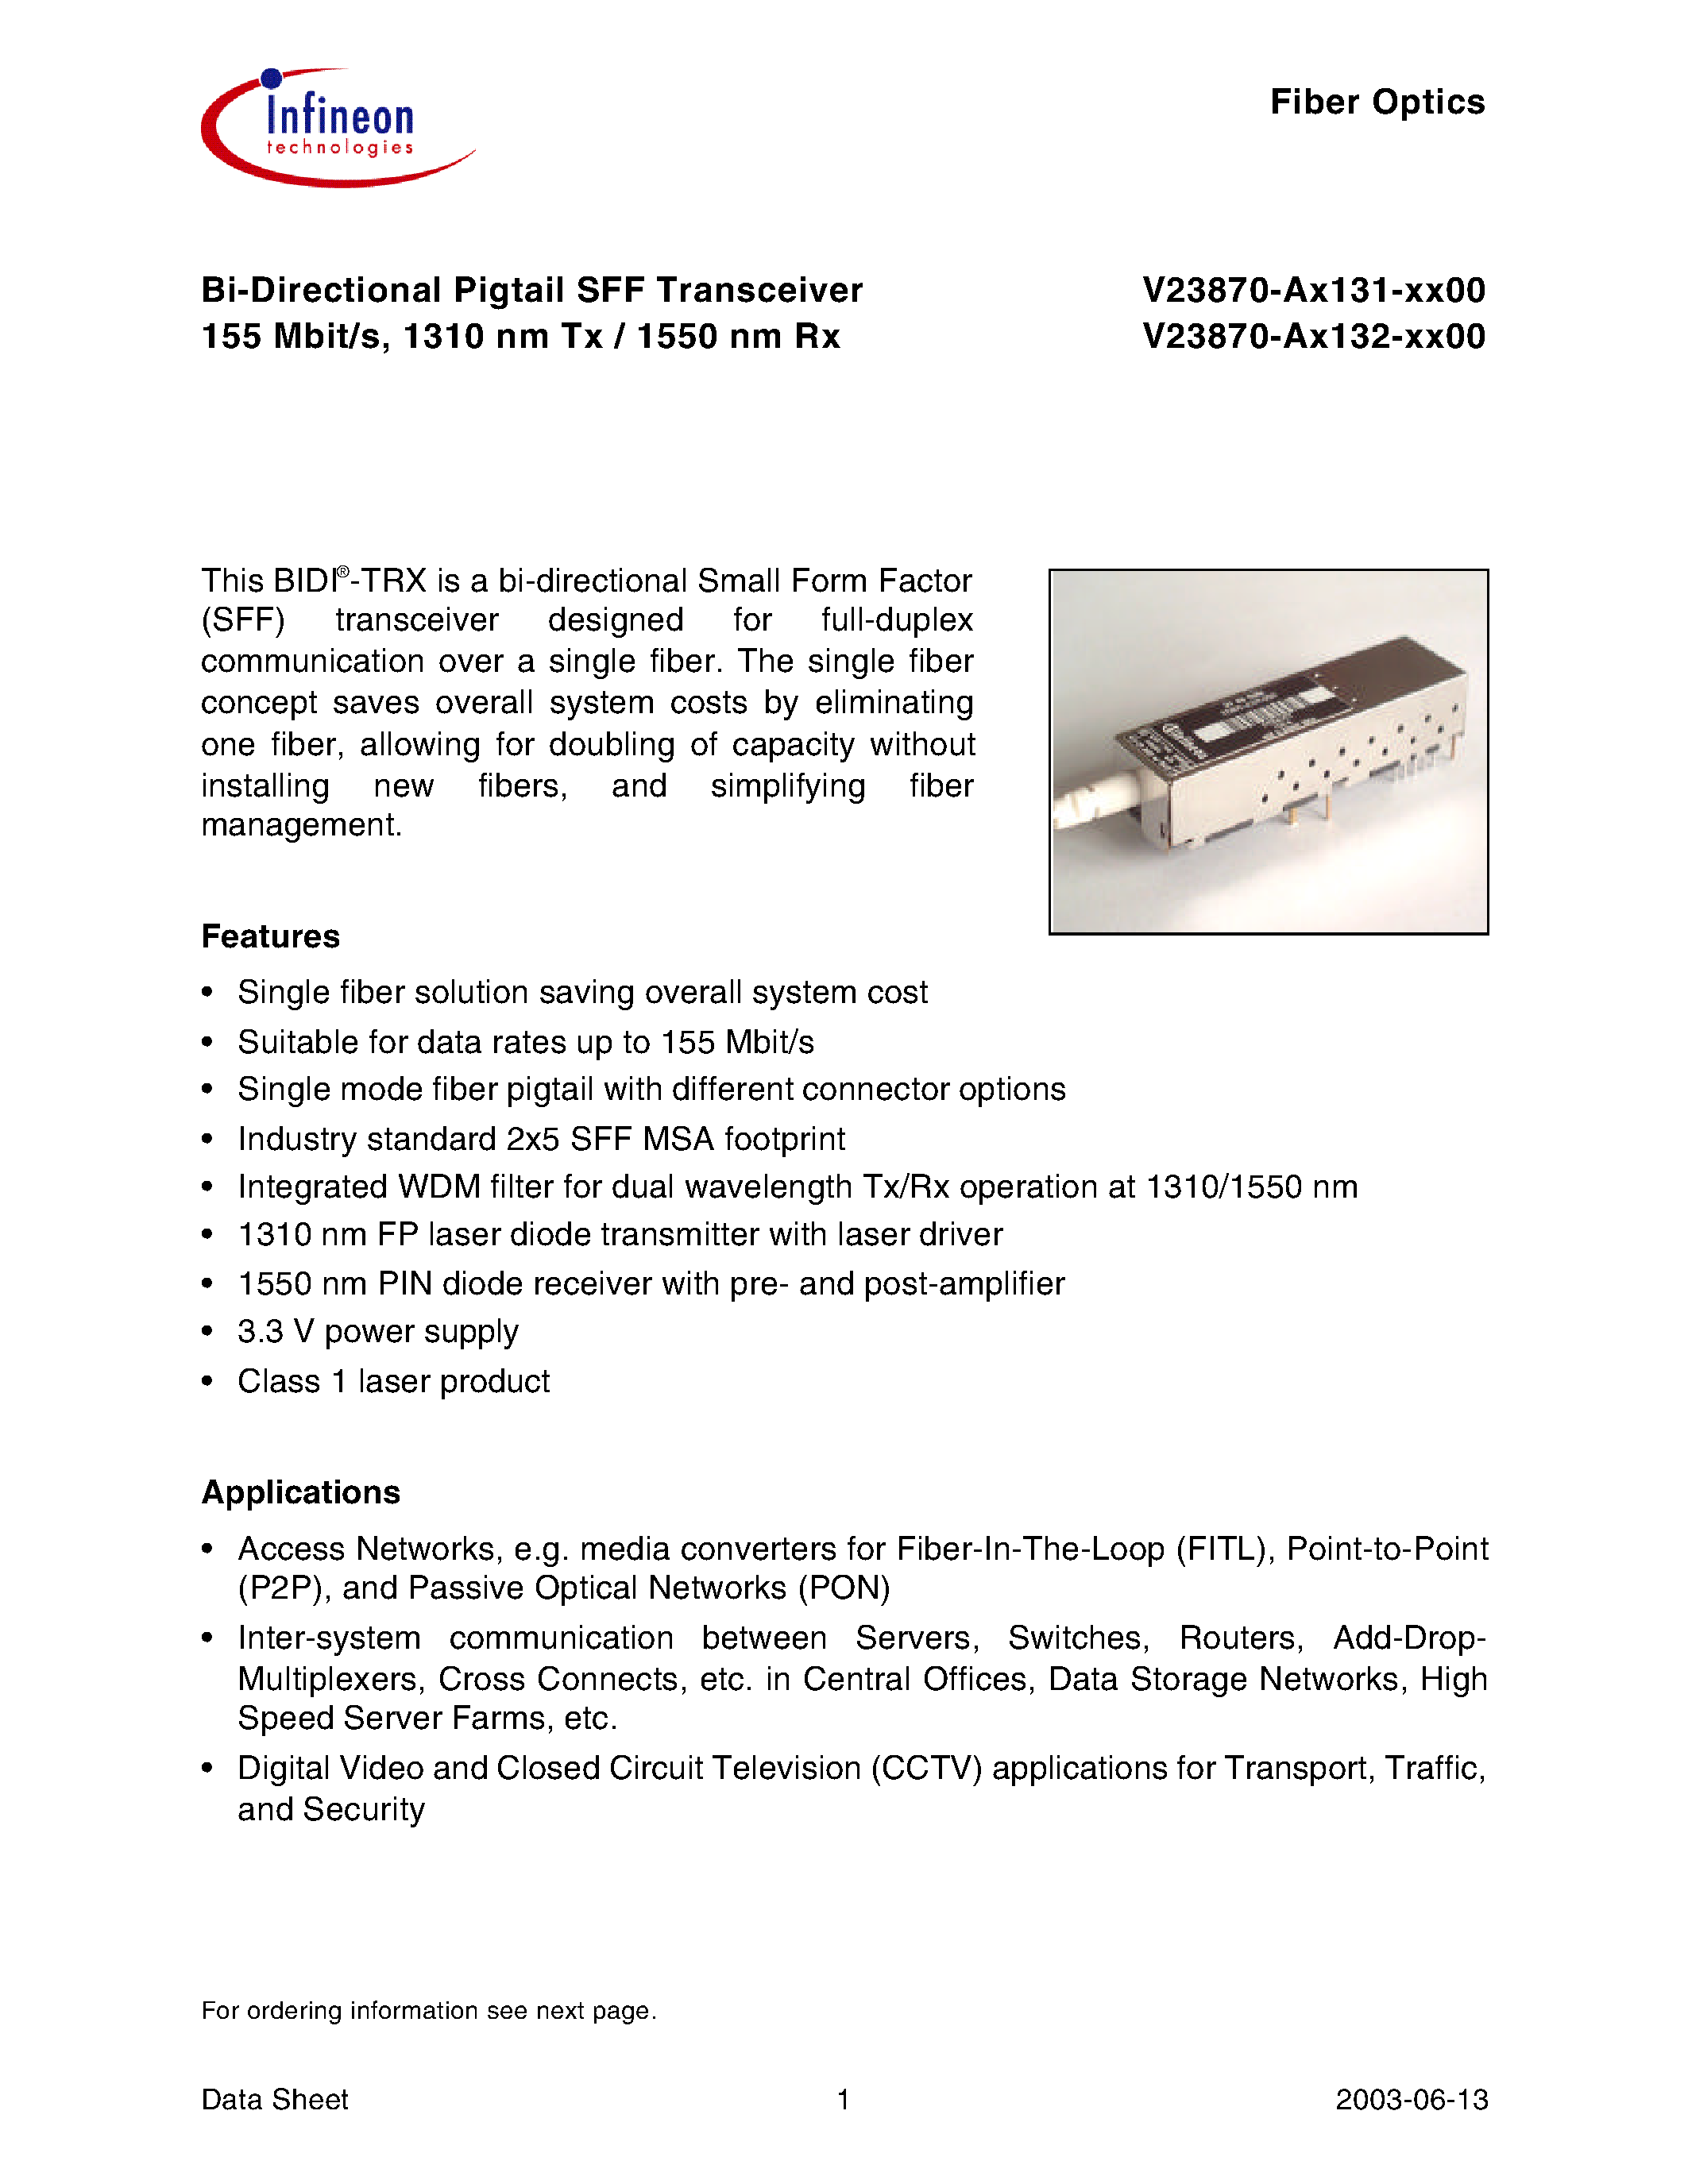 Datasheet V23870-A1131-K200 - Bi-Directional Pigtail SFF Transceiver 155 Mbit/s/ 1310 nm Tx / 1550 nm Rx page 1